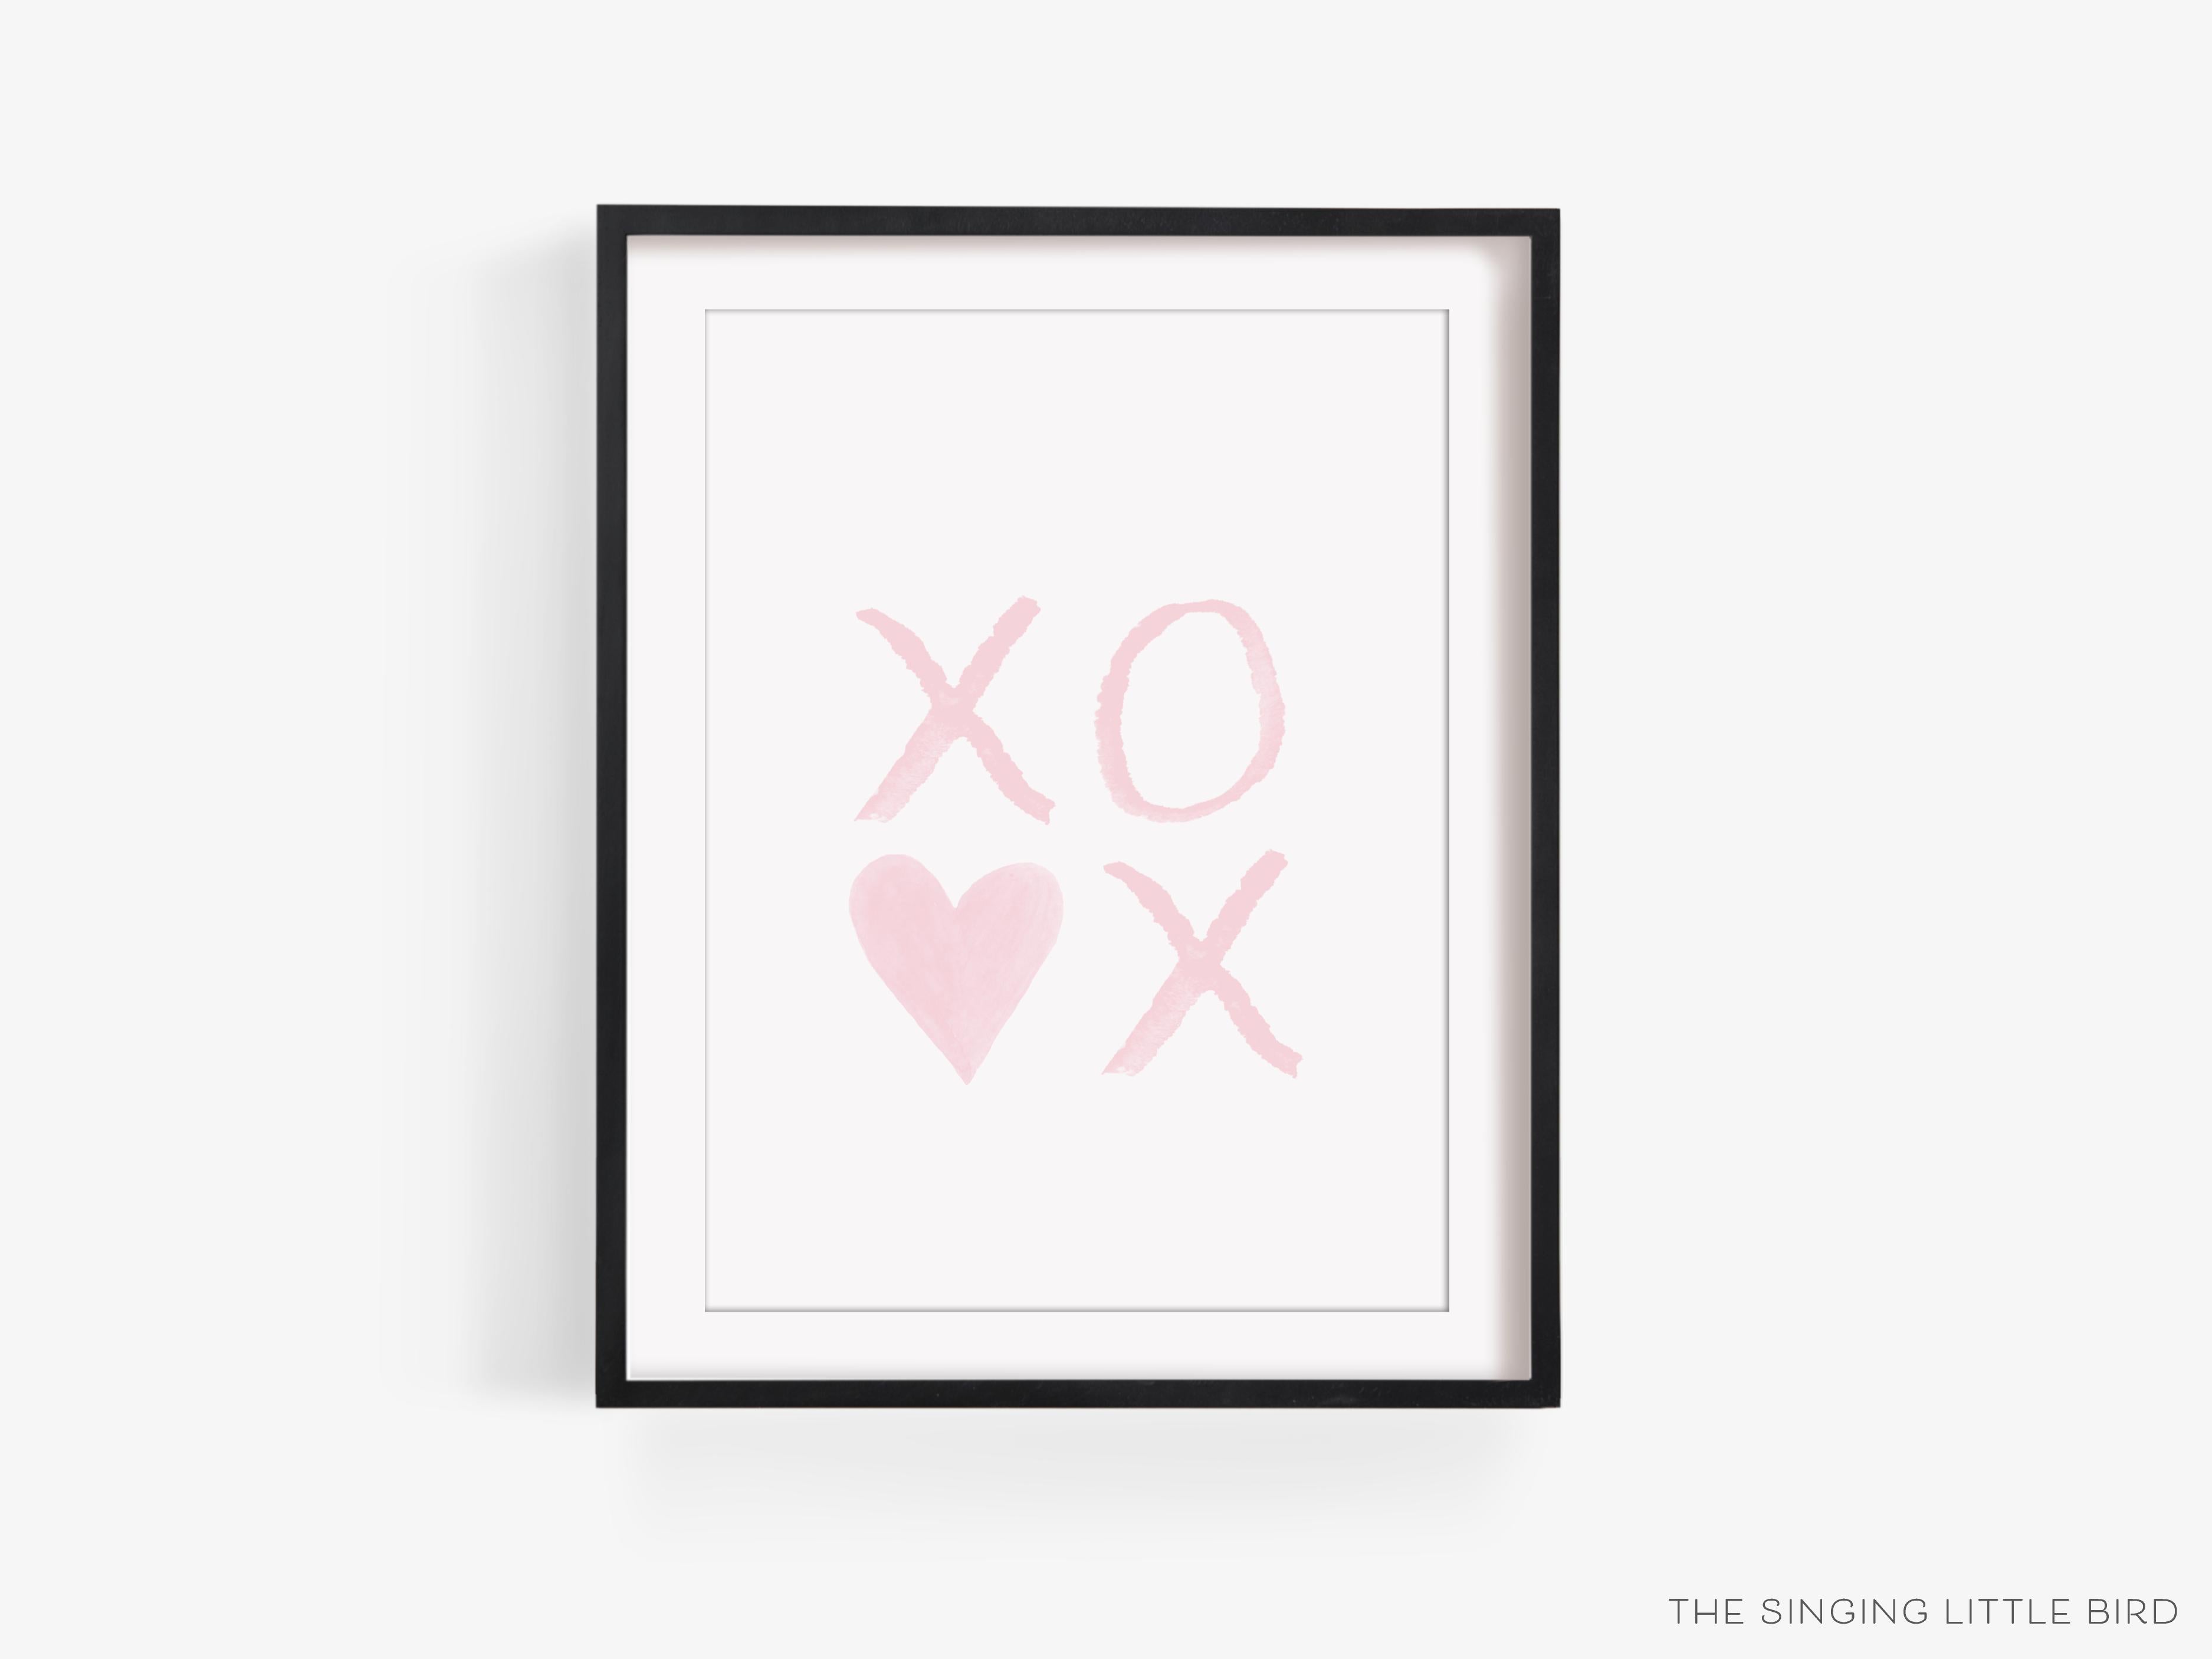 XOXO Pink with Heart Art Print-This watercolor art print features our hand-painted xo's and heart, printed in the USA on 120lb high quality art paper. This makes a great gift or wall decor for the hugs and kisses lover in your life.-The Singing Little Bird